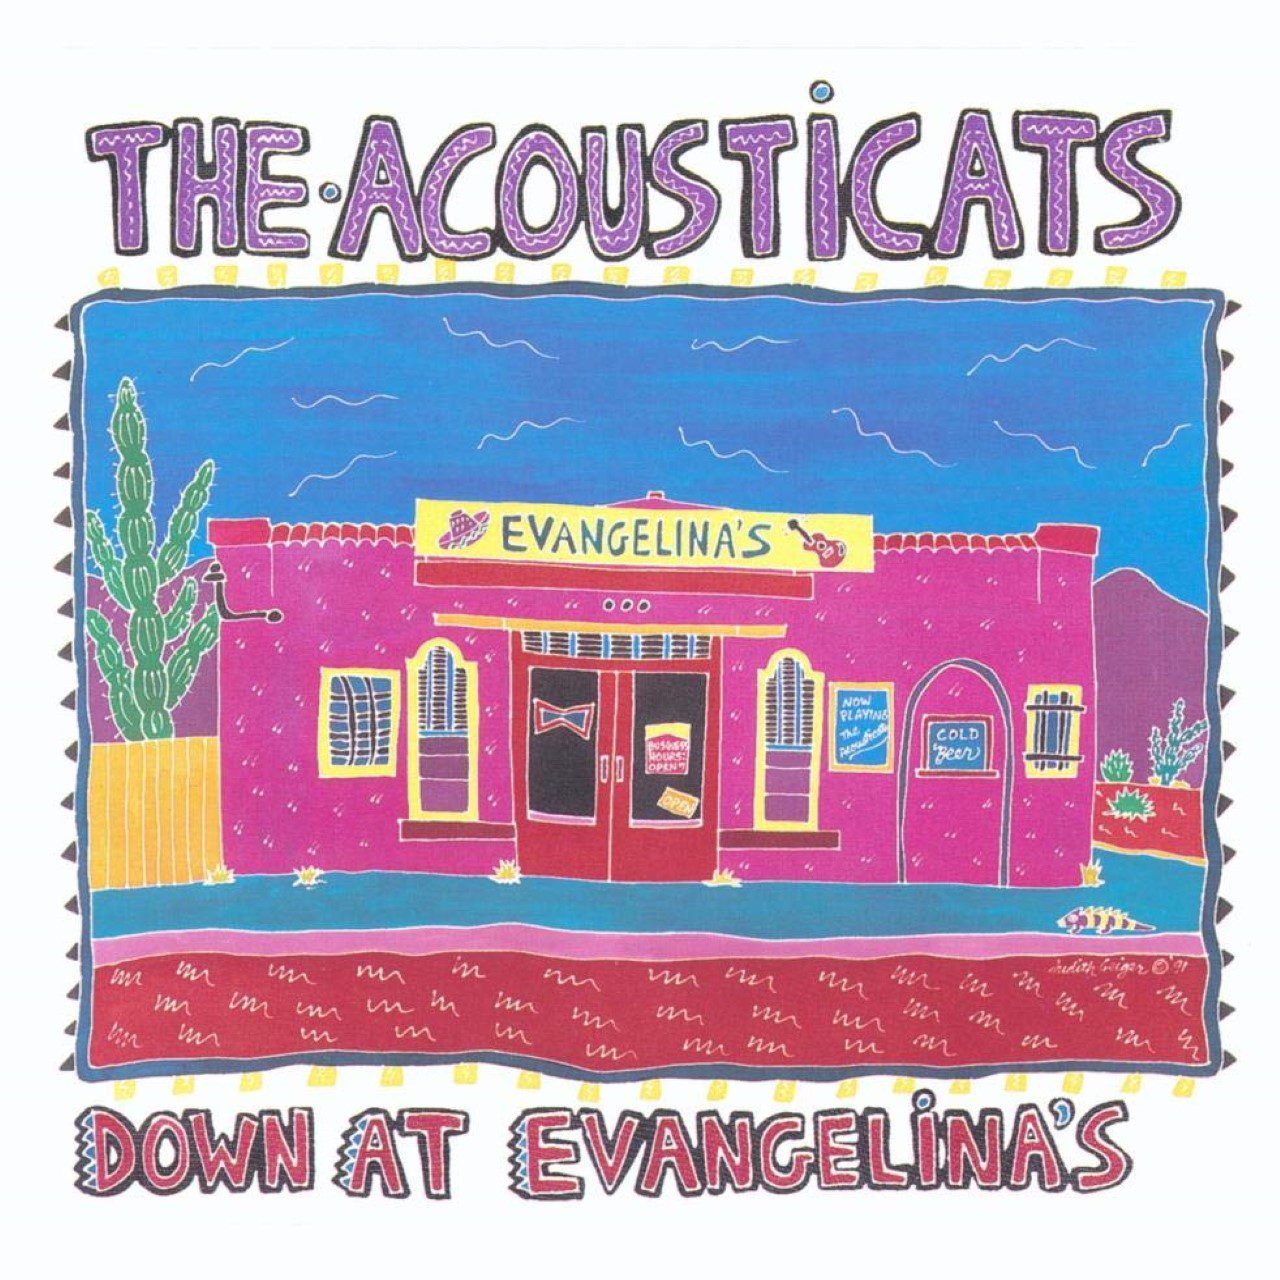 Acousticats - Down At Evangelina’s cover album